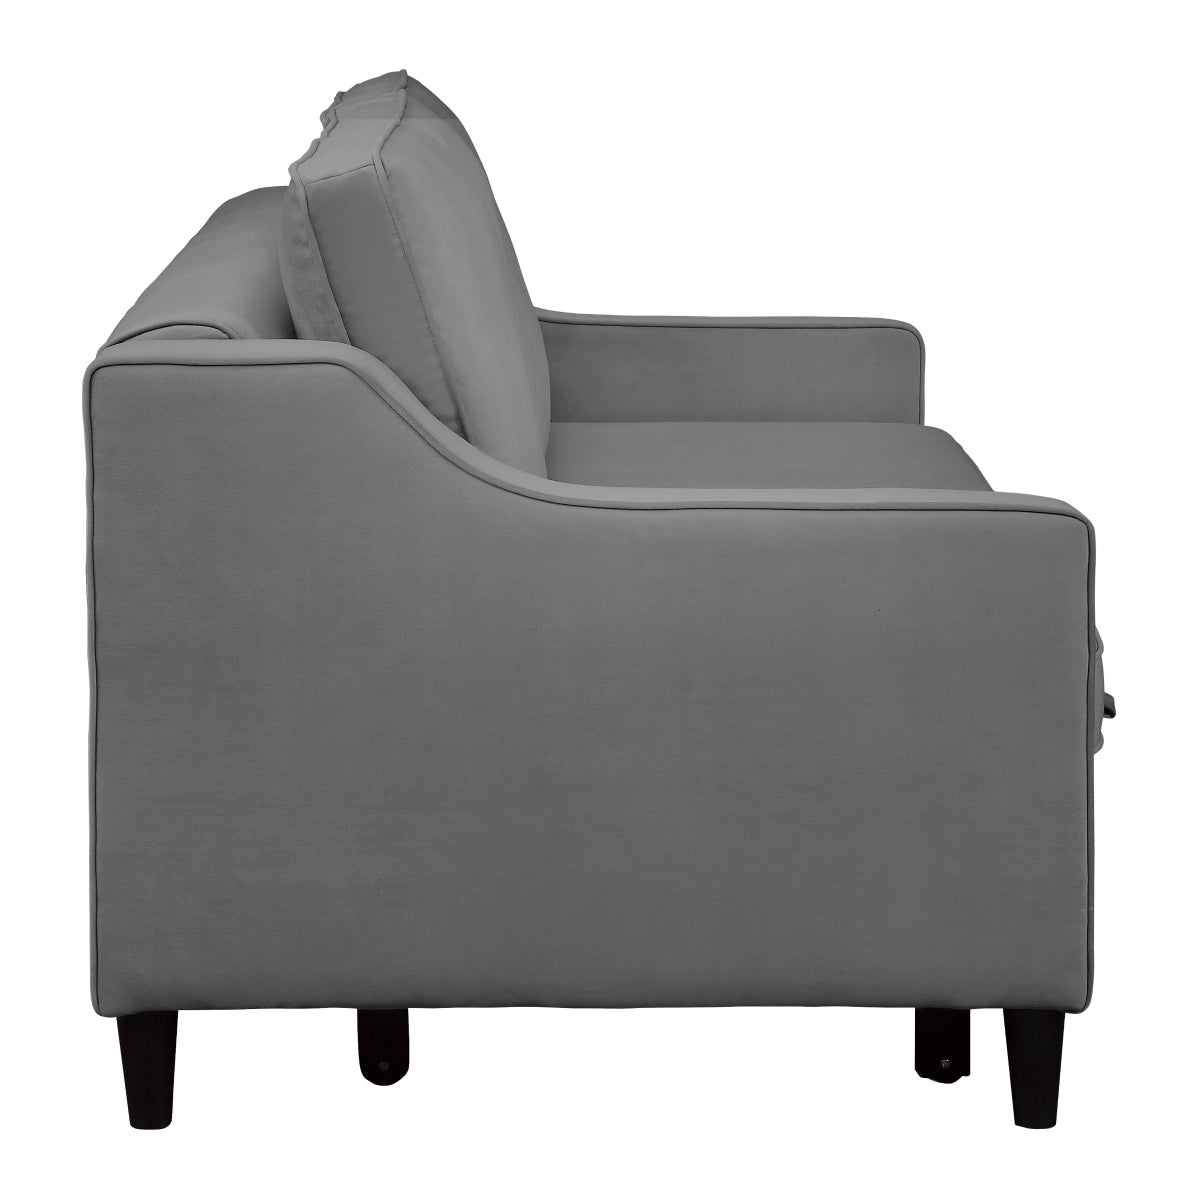 Adelia Dark Gray Velvet Convertible Studio Sofa with Pull-out Bed - 9428DG-3CL - Bien Home Furniture &amp; Electronics